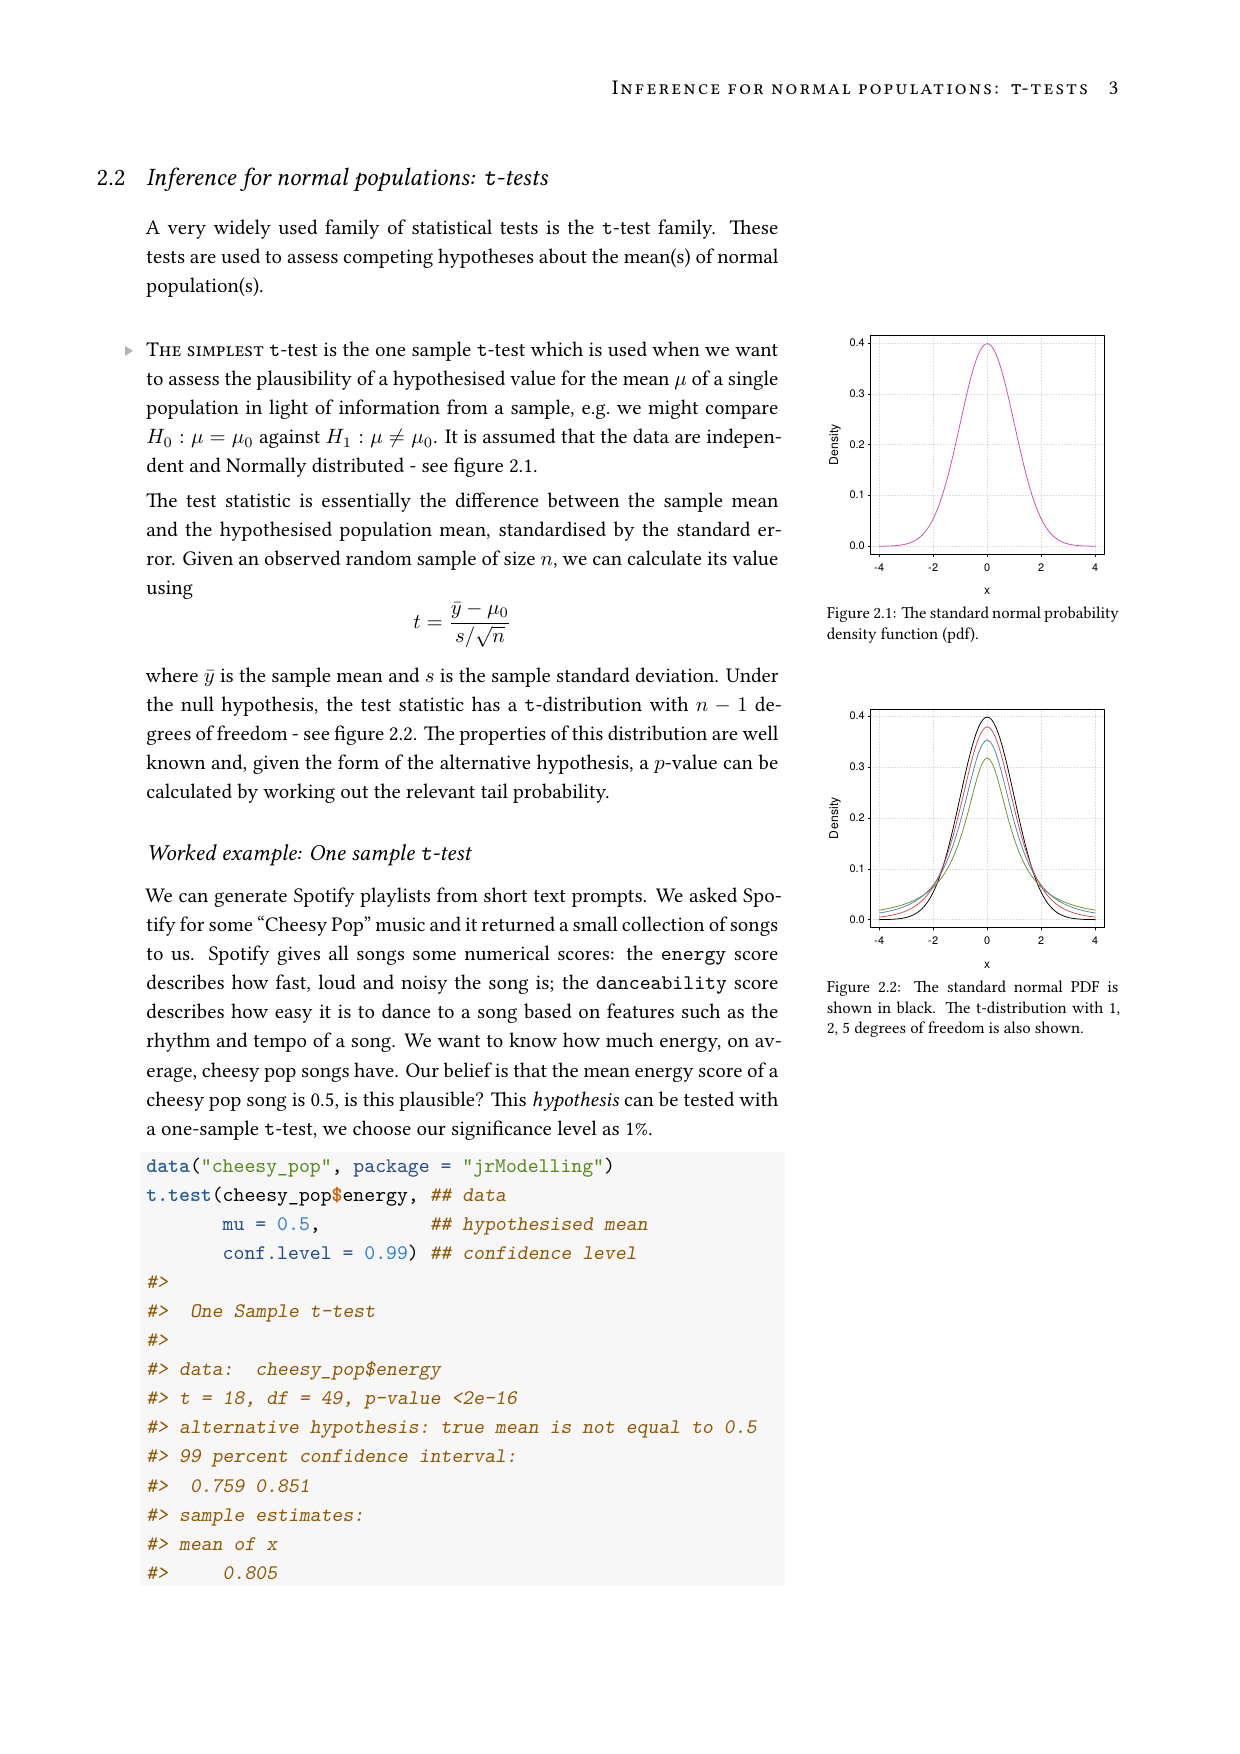 Example course material for 'Statistical Modelling with R'